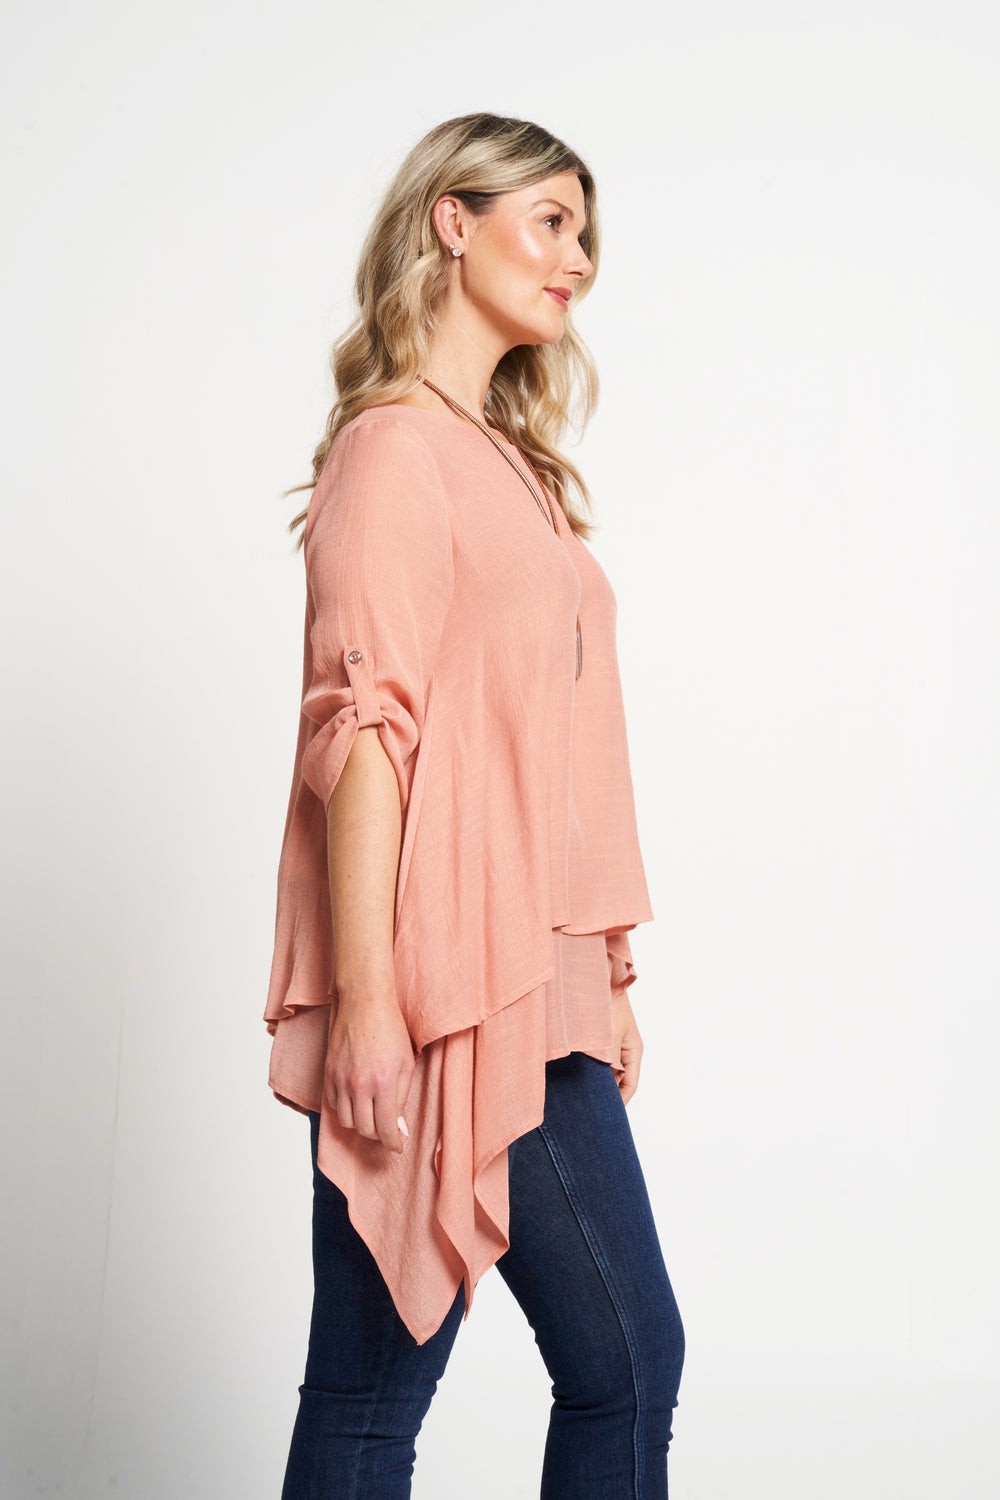 Saloos A-Line Layered Tunic Top with Necklace